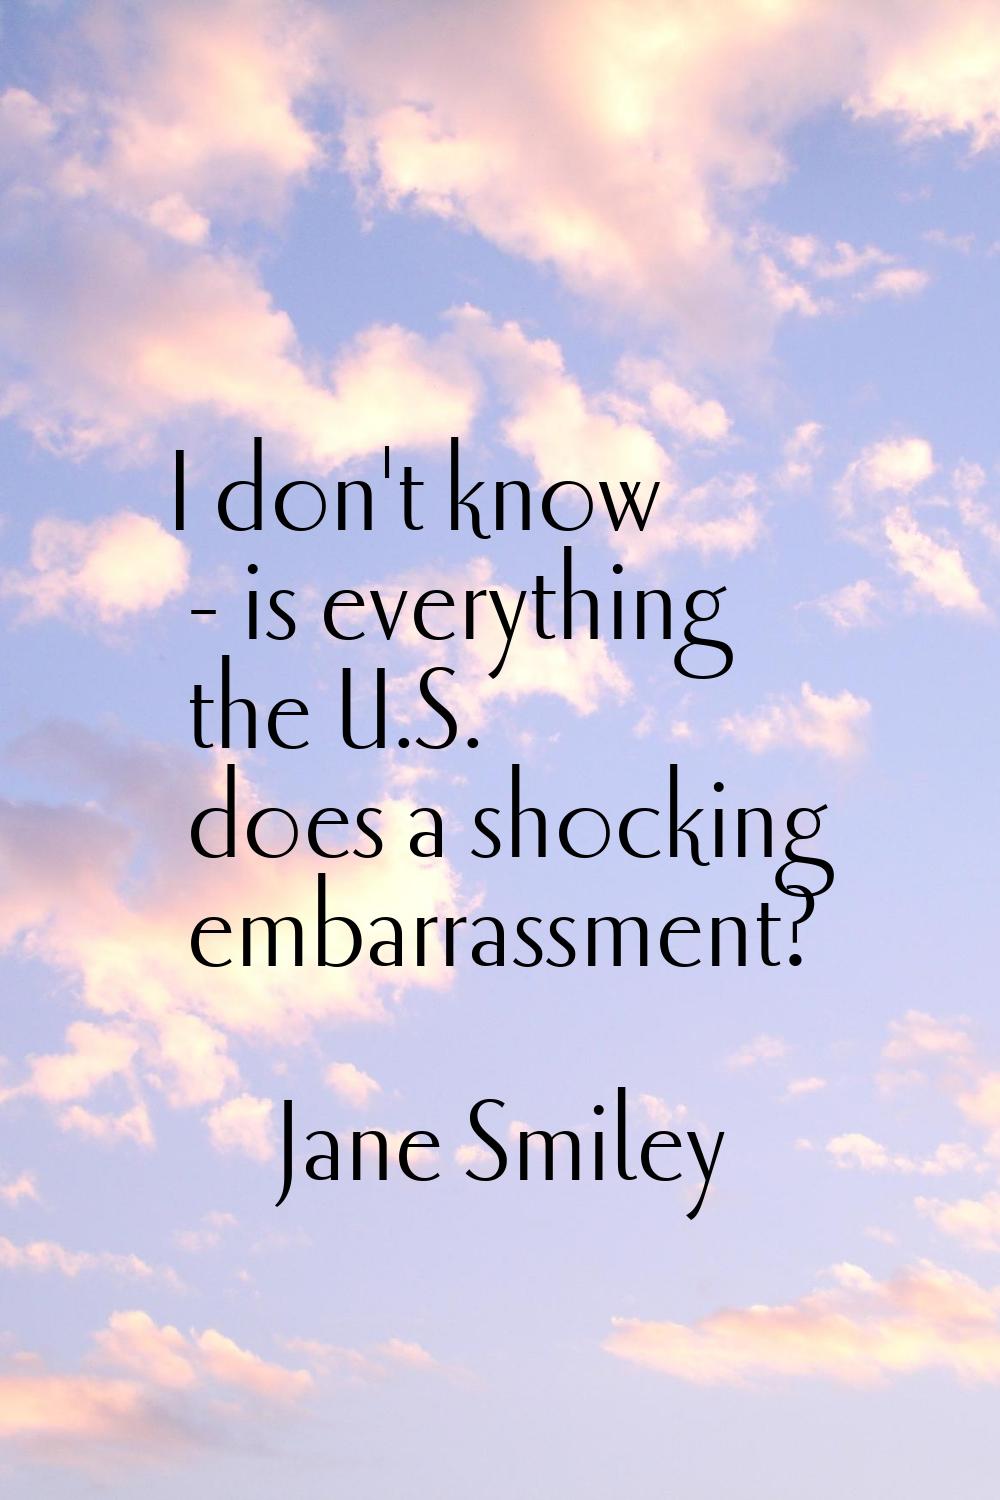 I don't know - is everything the U.S. does a shocking embarrassment?